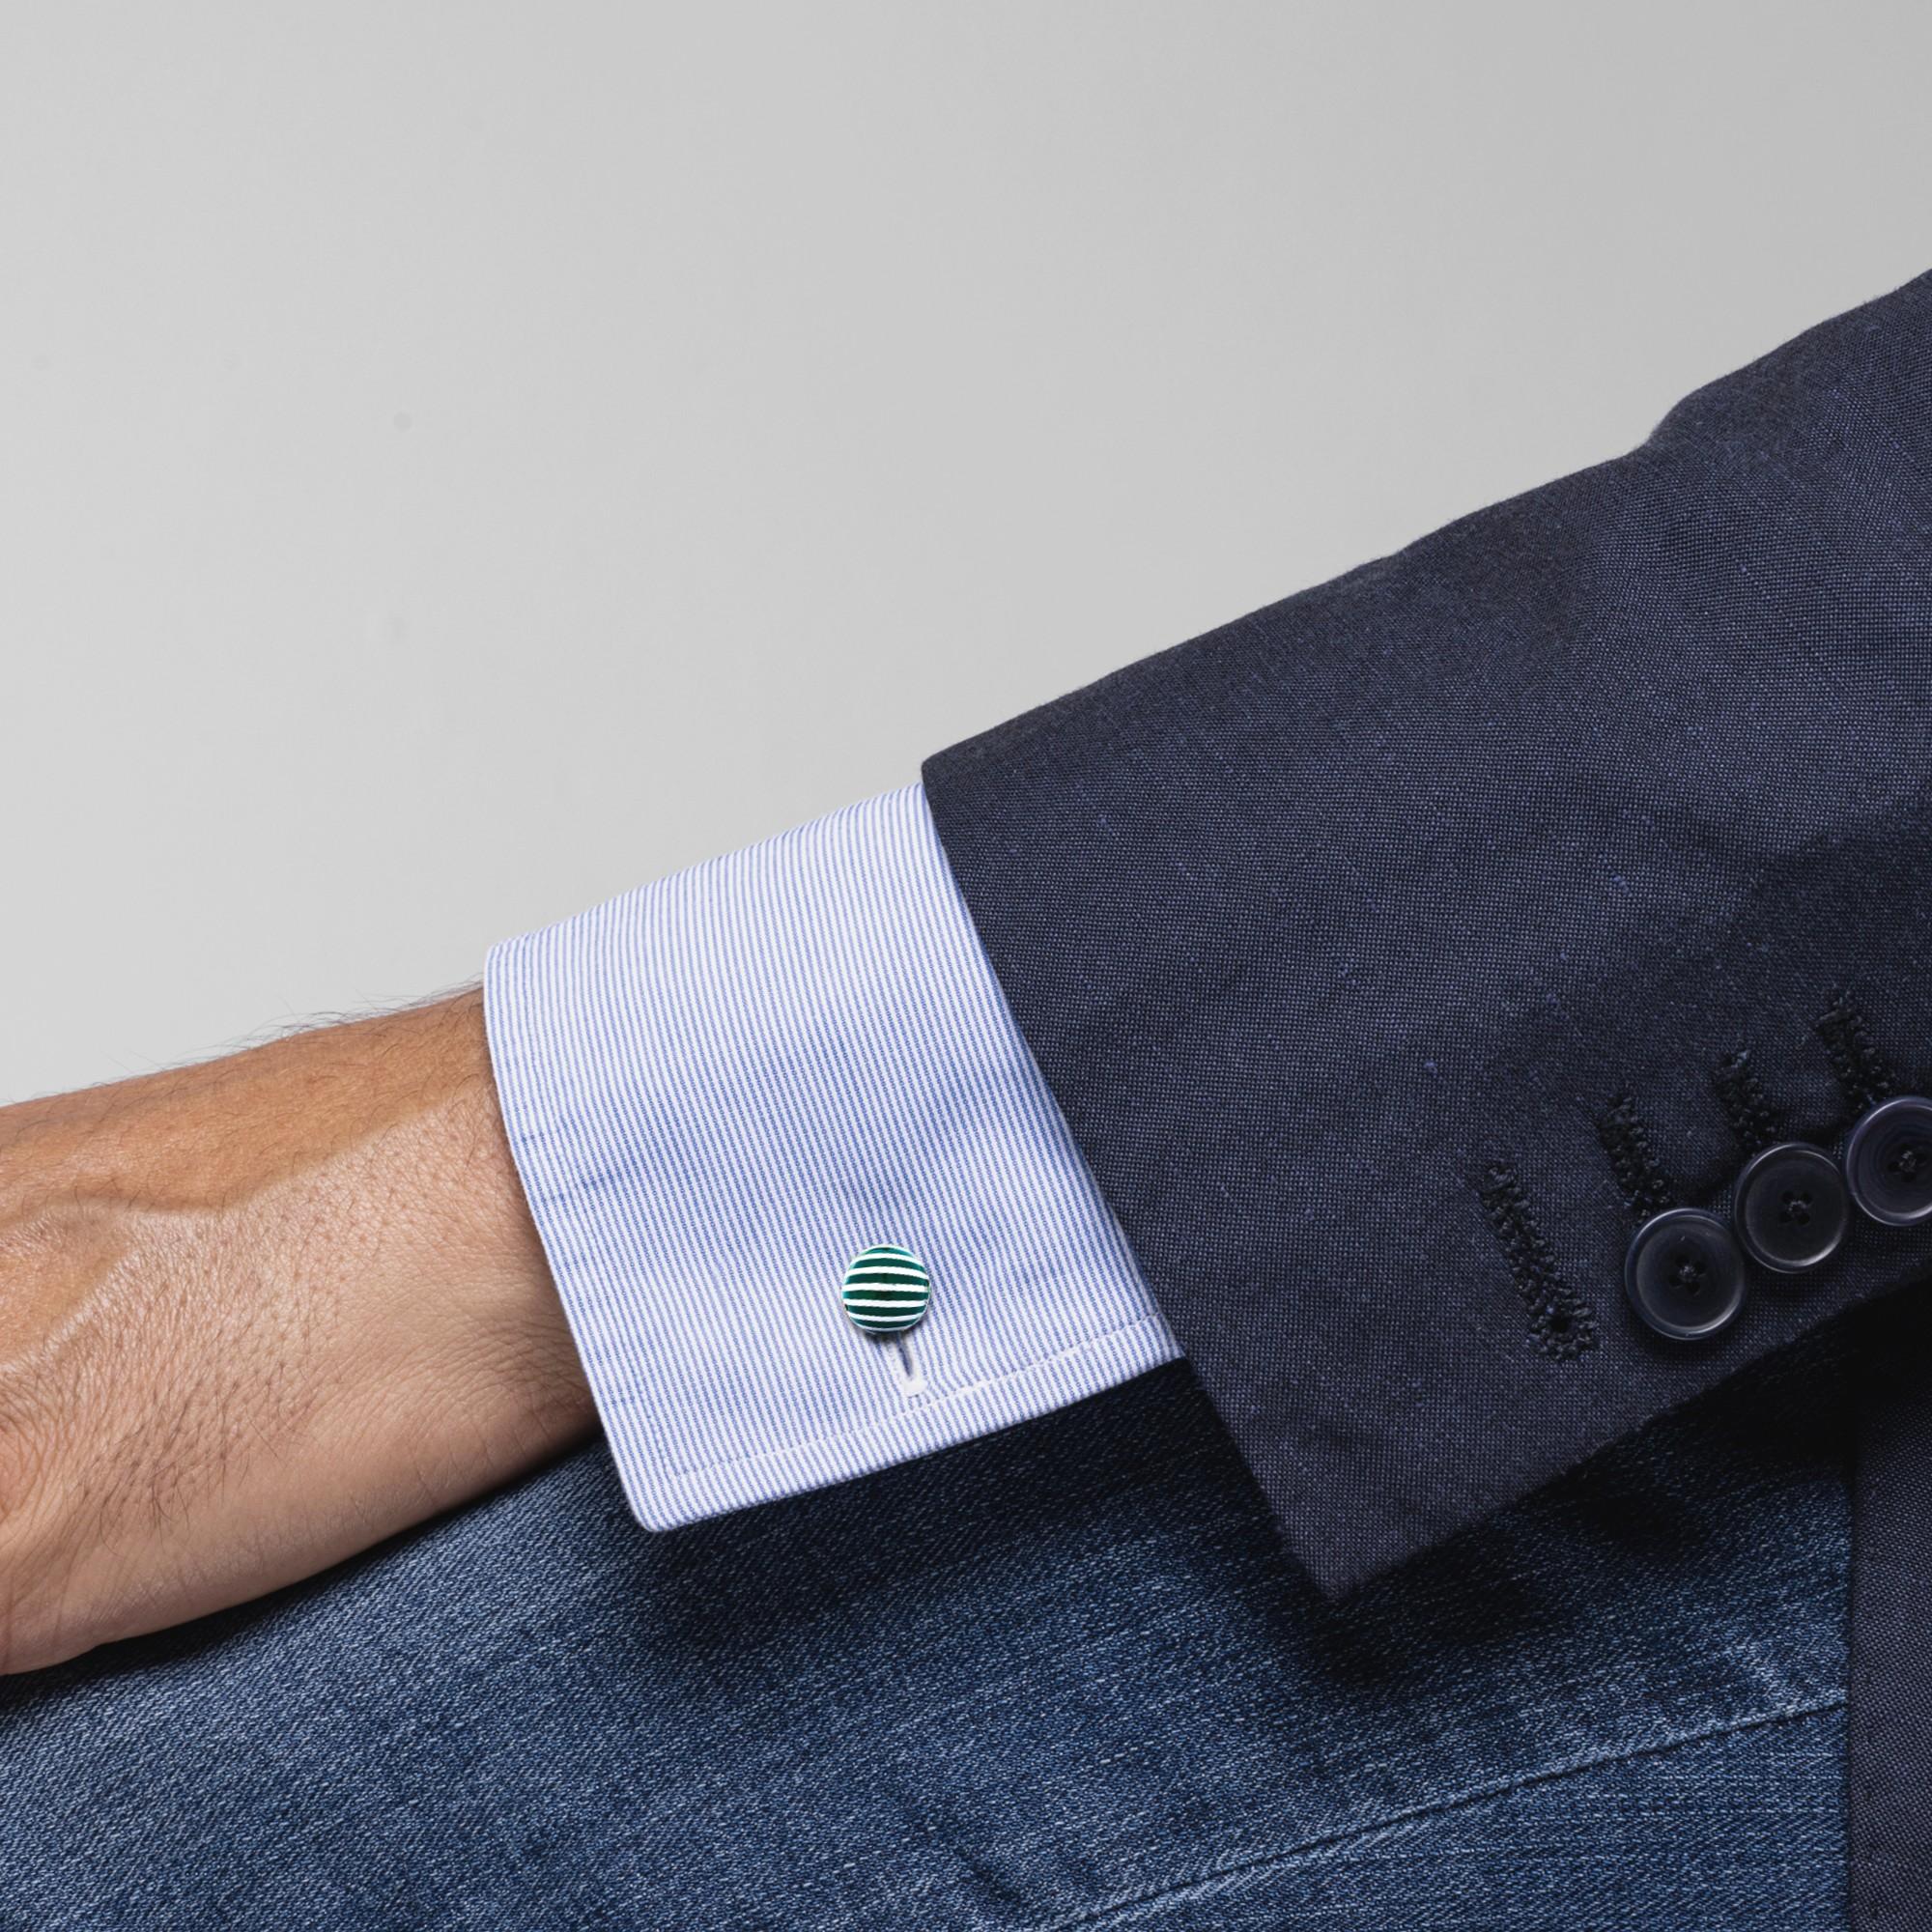 Alex Jona design collection, hand crafted in Italy, sterling silver cufflinks with green enamel stripes. Marked JONA.
Alex Jona cufflinks stand out, not only for their special design and for the excellent quality, but also for the careful attention